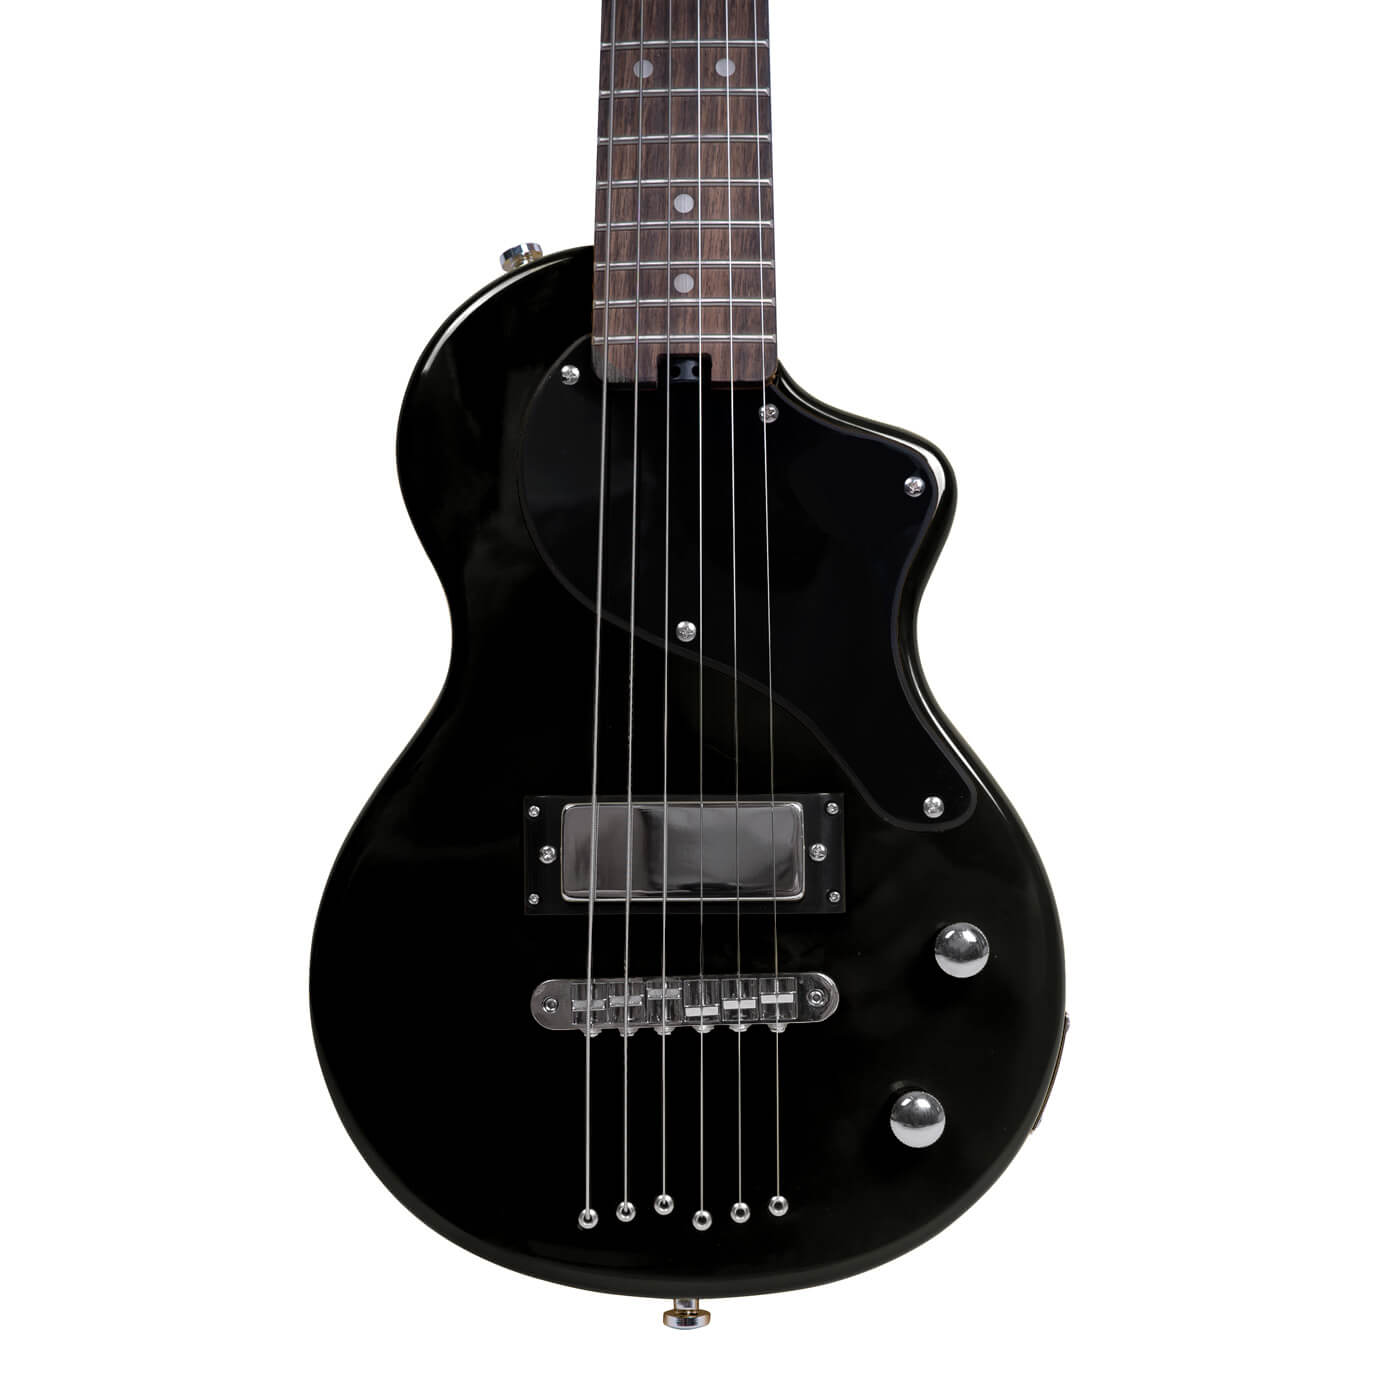 Carry-on ST Guitar - Black